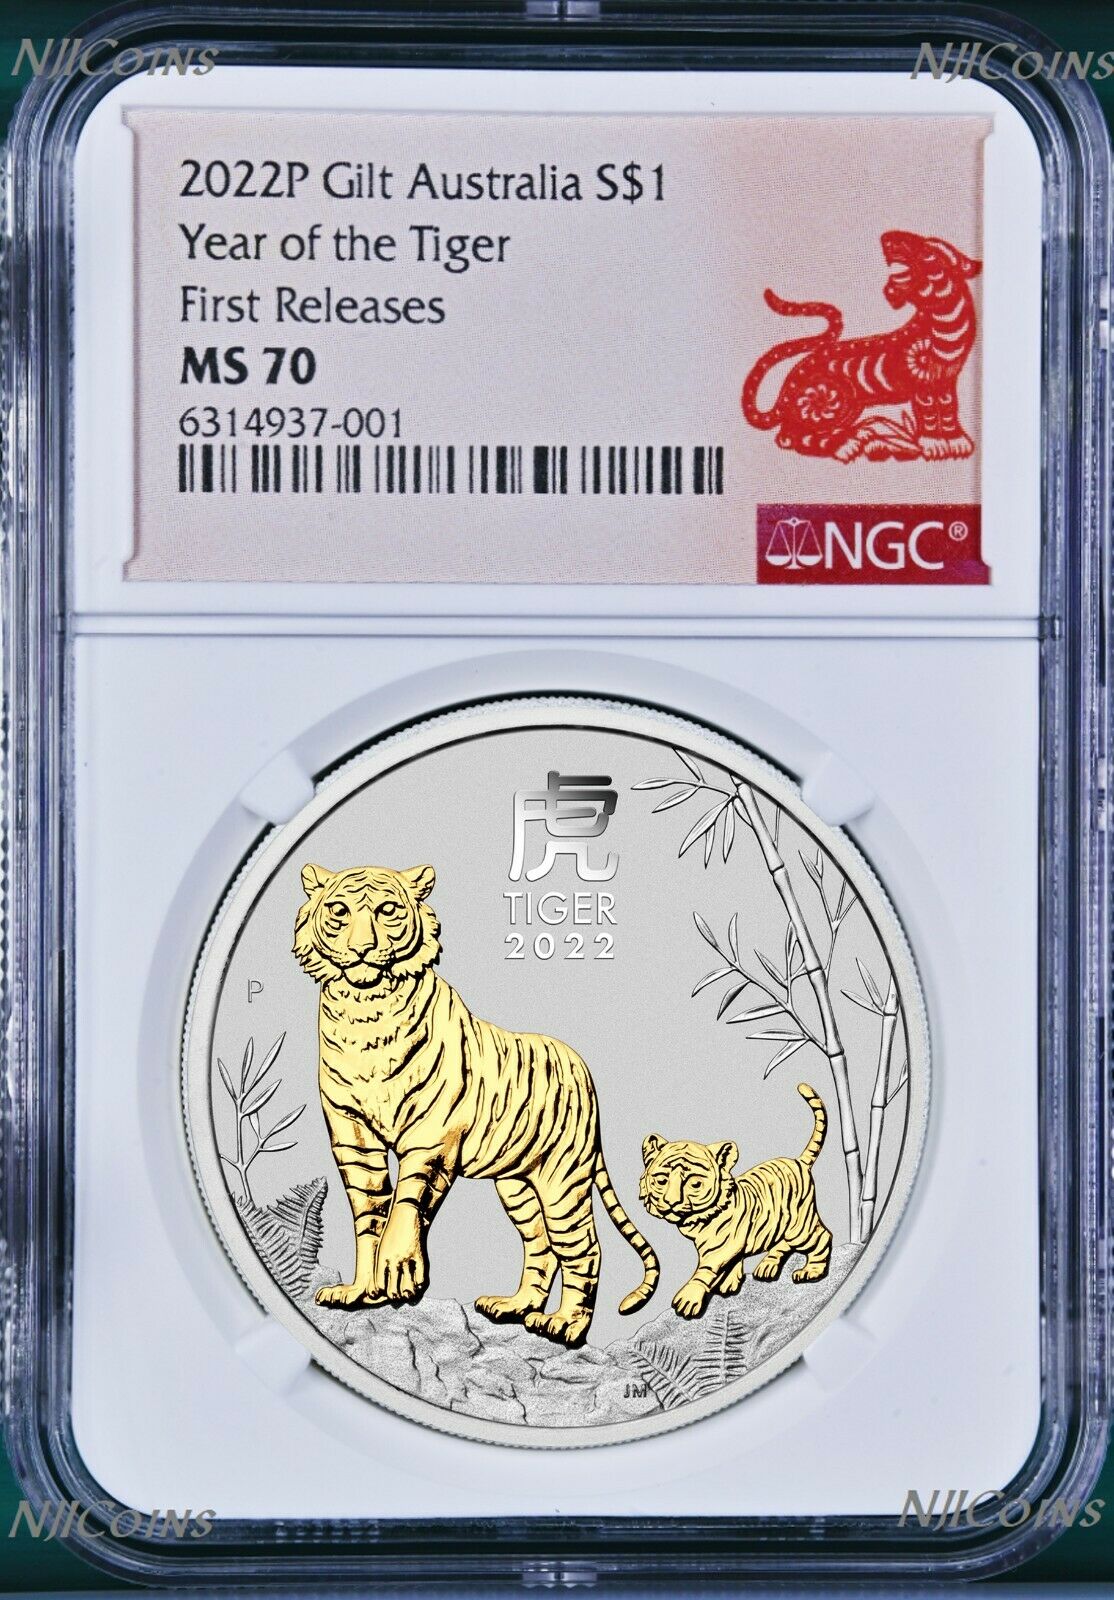 2022 Australia GILDED Silver Lunar Year of the TIGER NGC MS 70 1oz